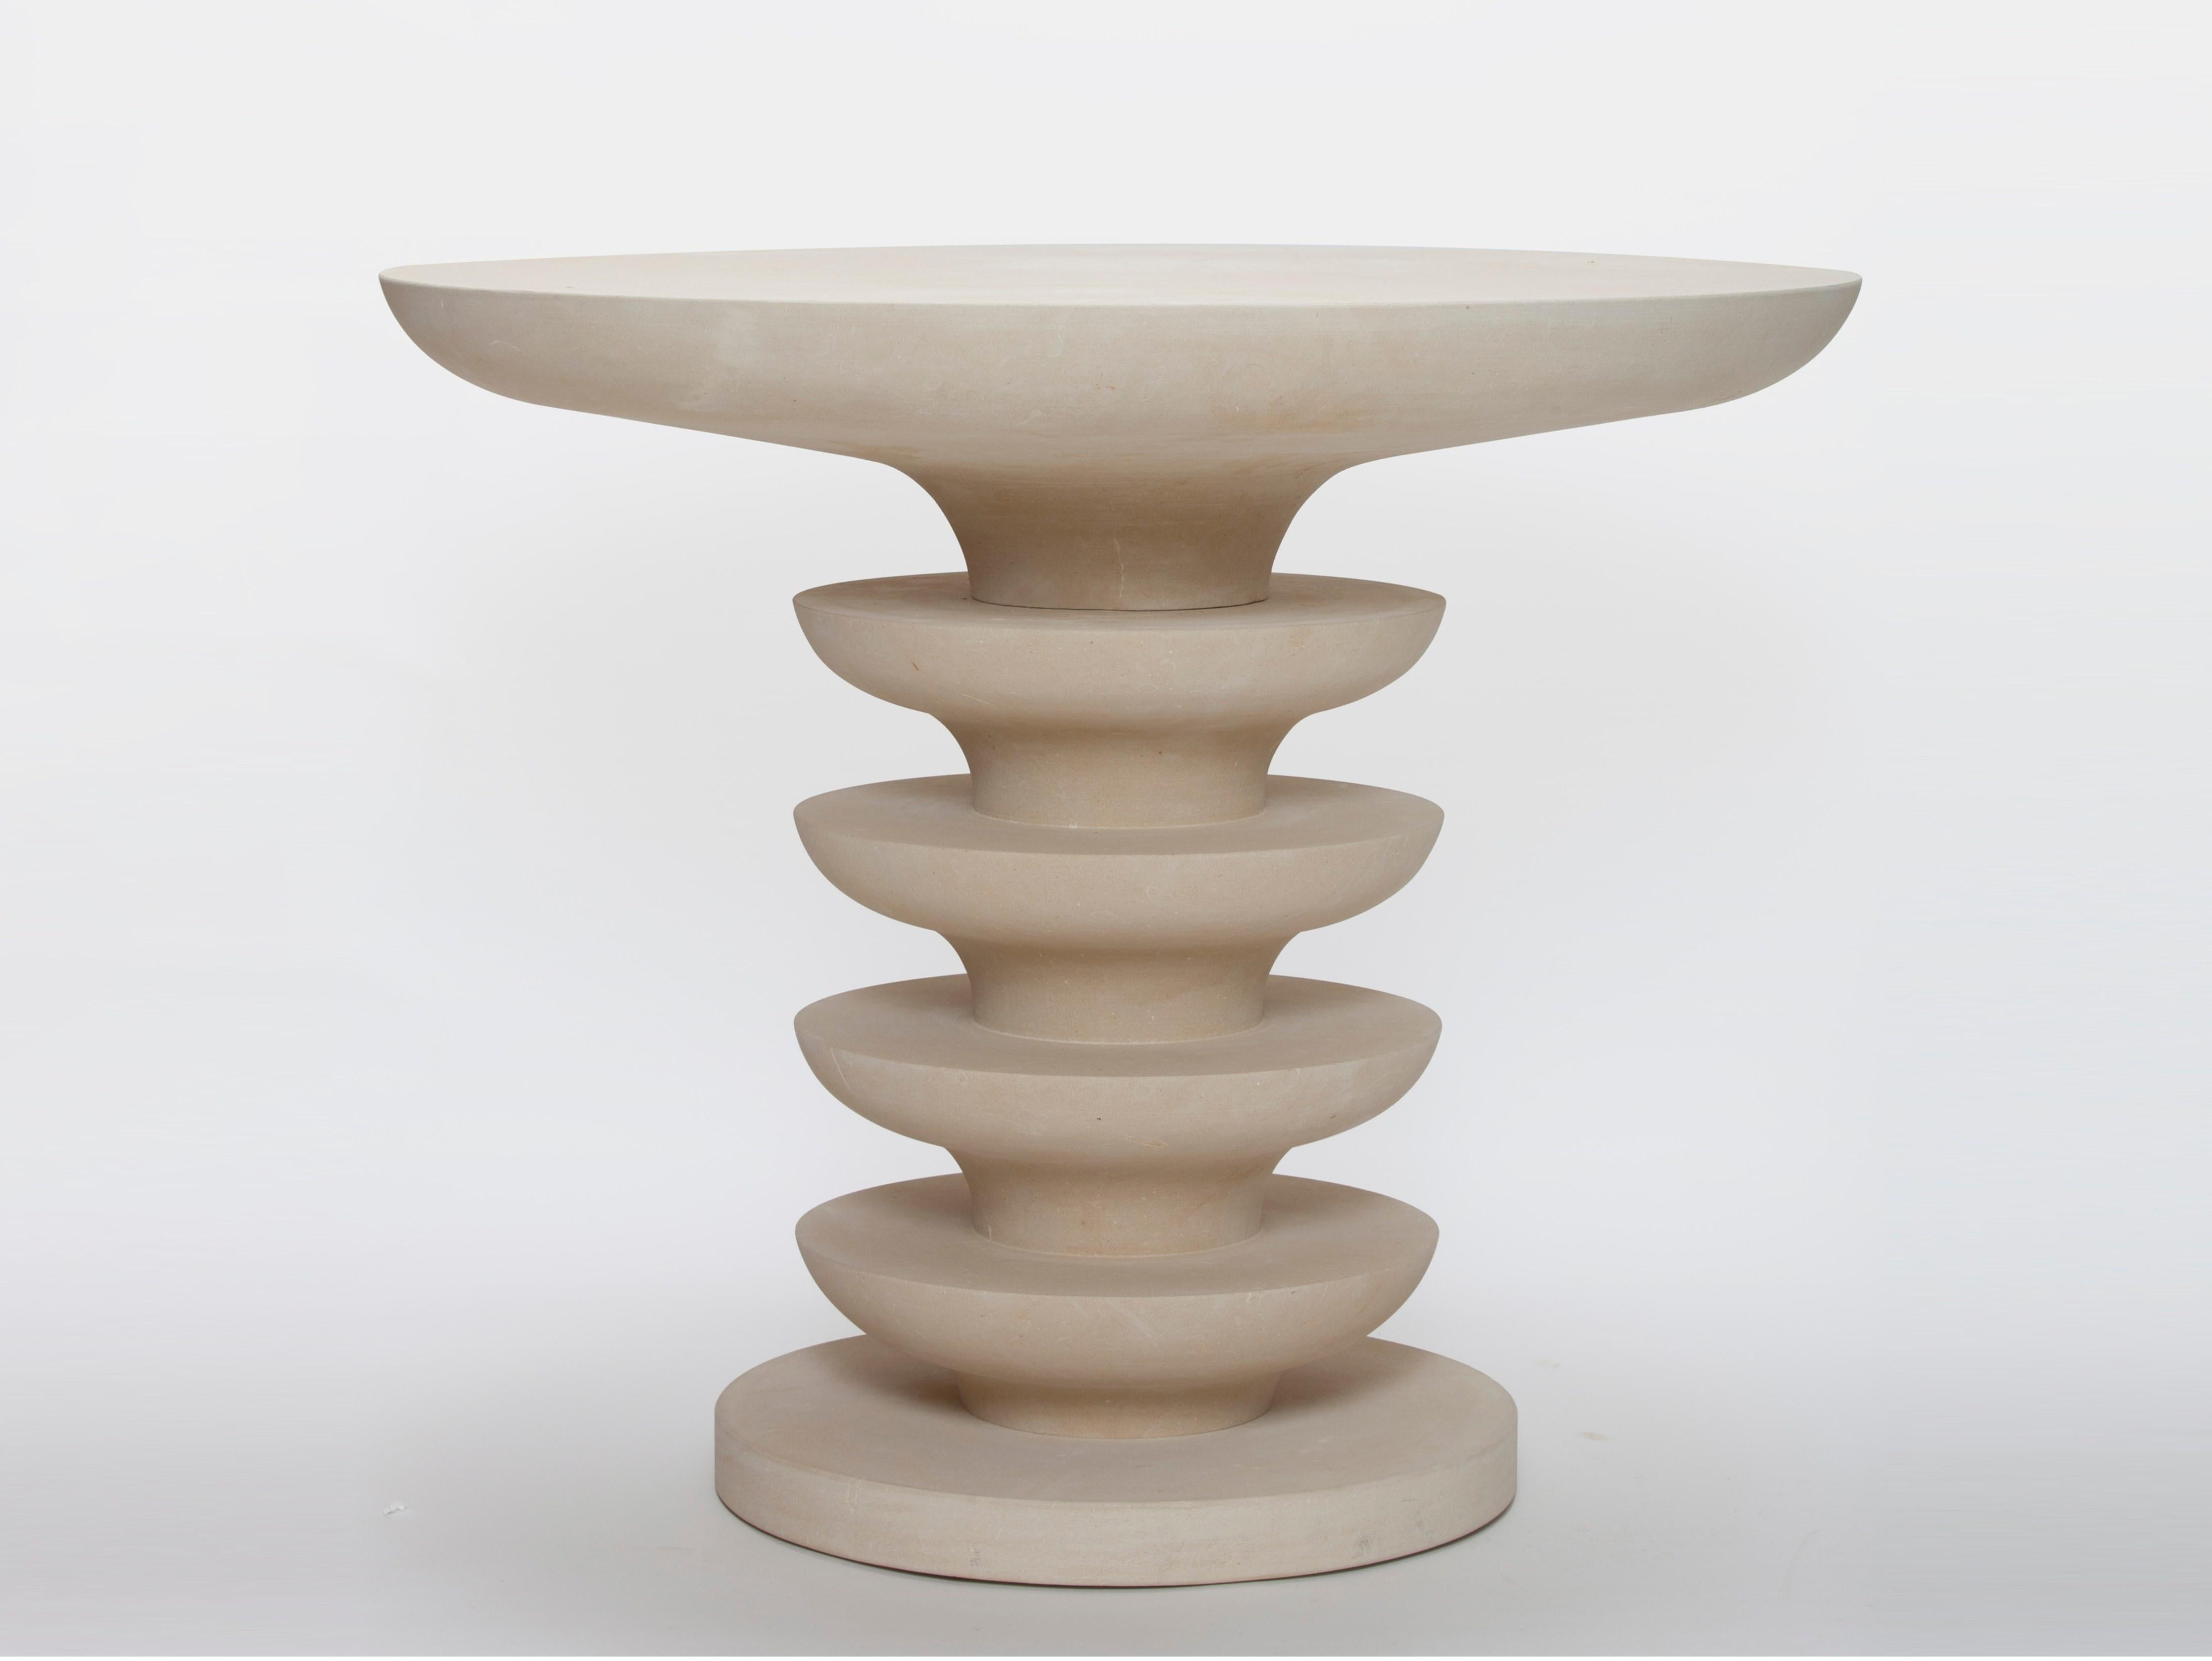 A sculptural beige limestone table suitable for indoor and outdoor settings.
Materials: limestone
Size: 90 cm diameter x 75 cm height
Weight: 250 lbs
Made In Italy.
Please contact us if you have any questions about customization and pricing. We will